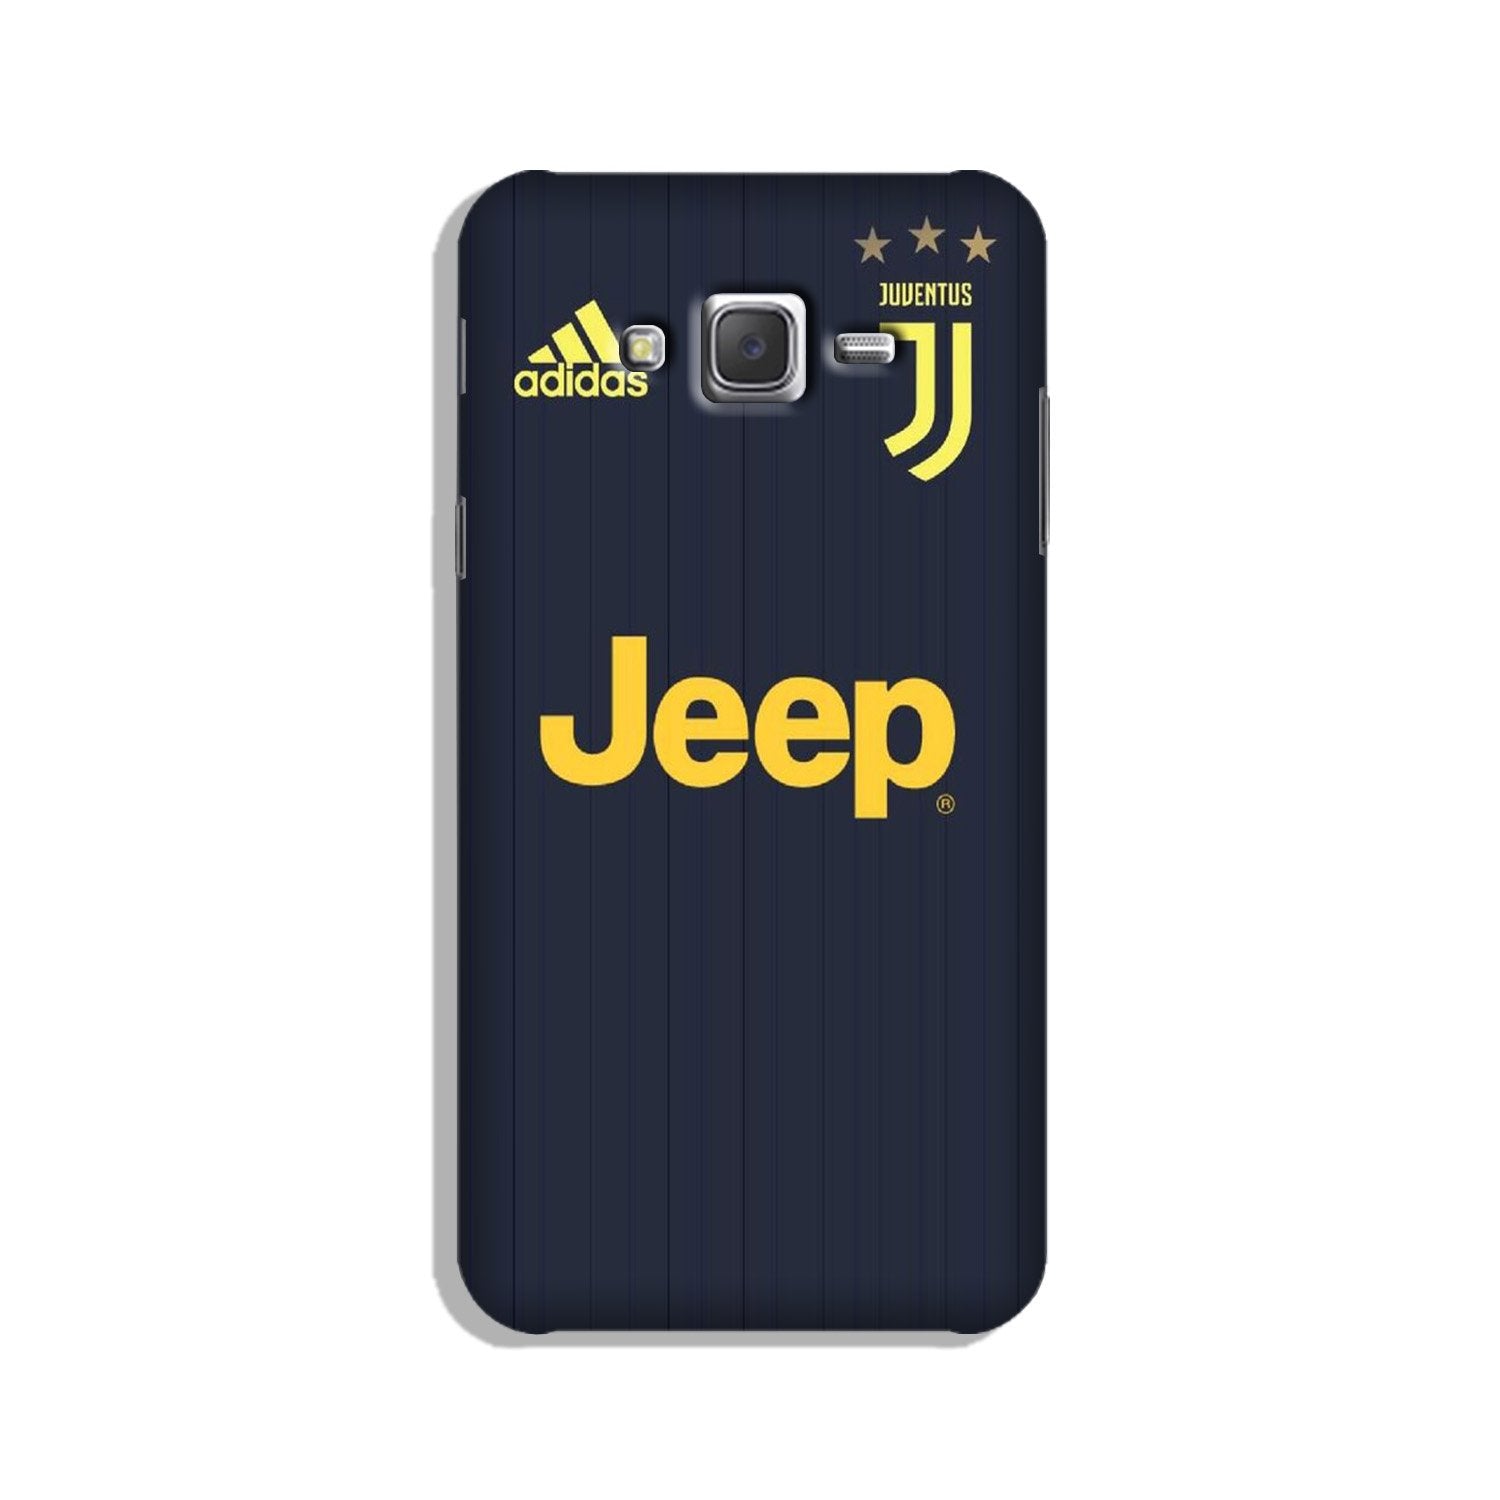 Jeep Juventus Case for Galaxy J7 Nxt  (Design - 161)